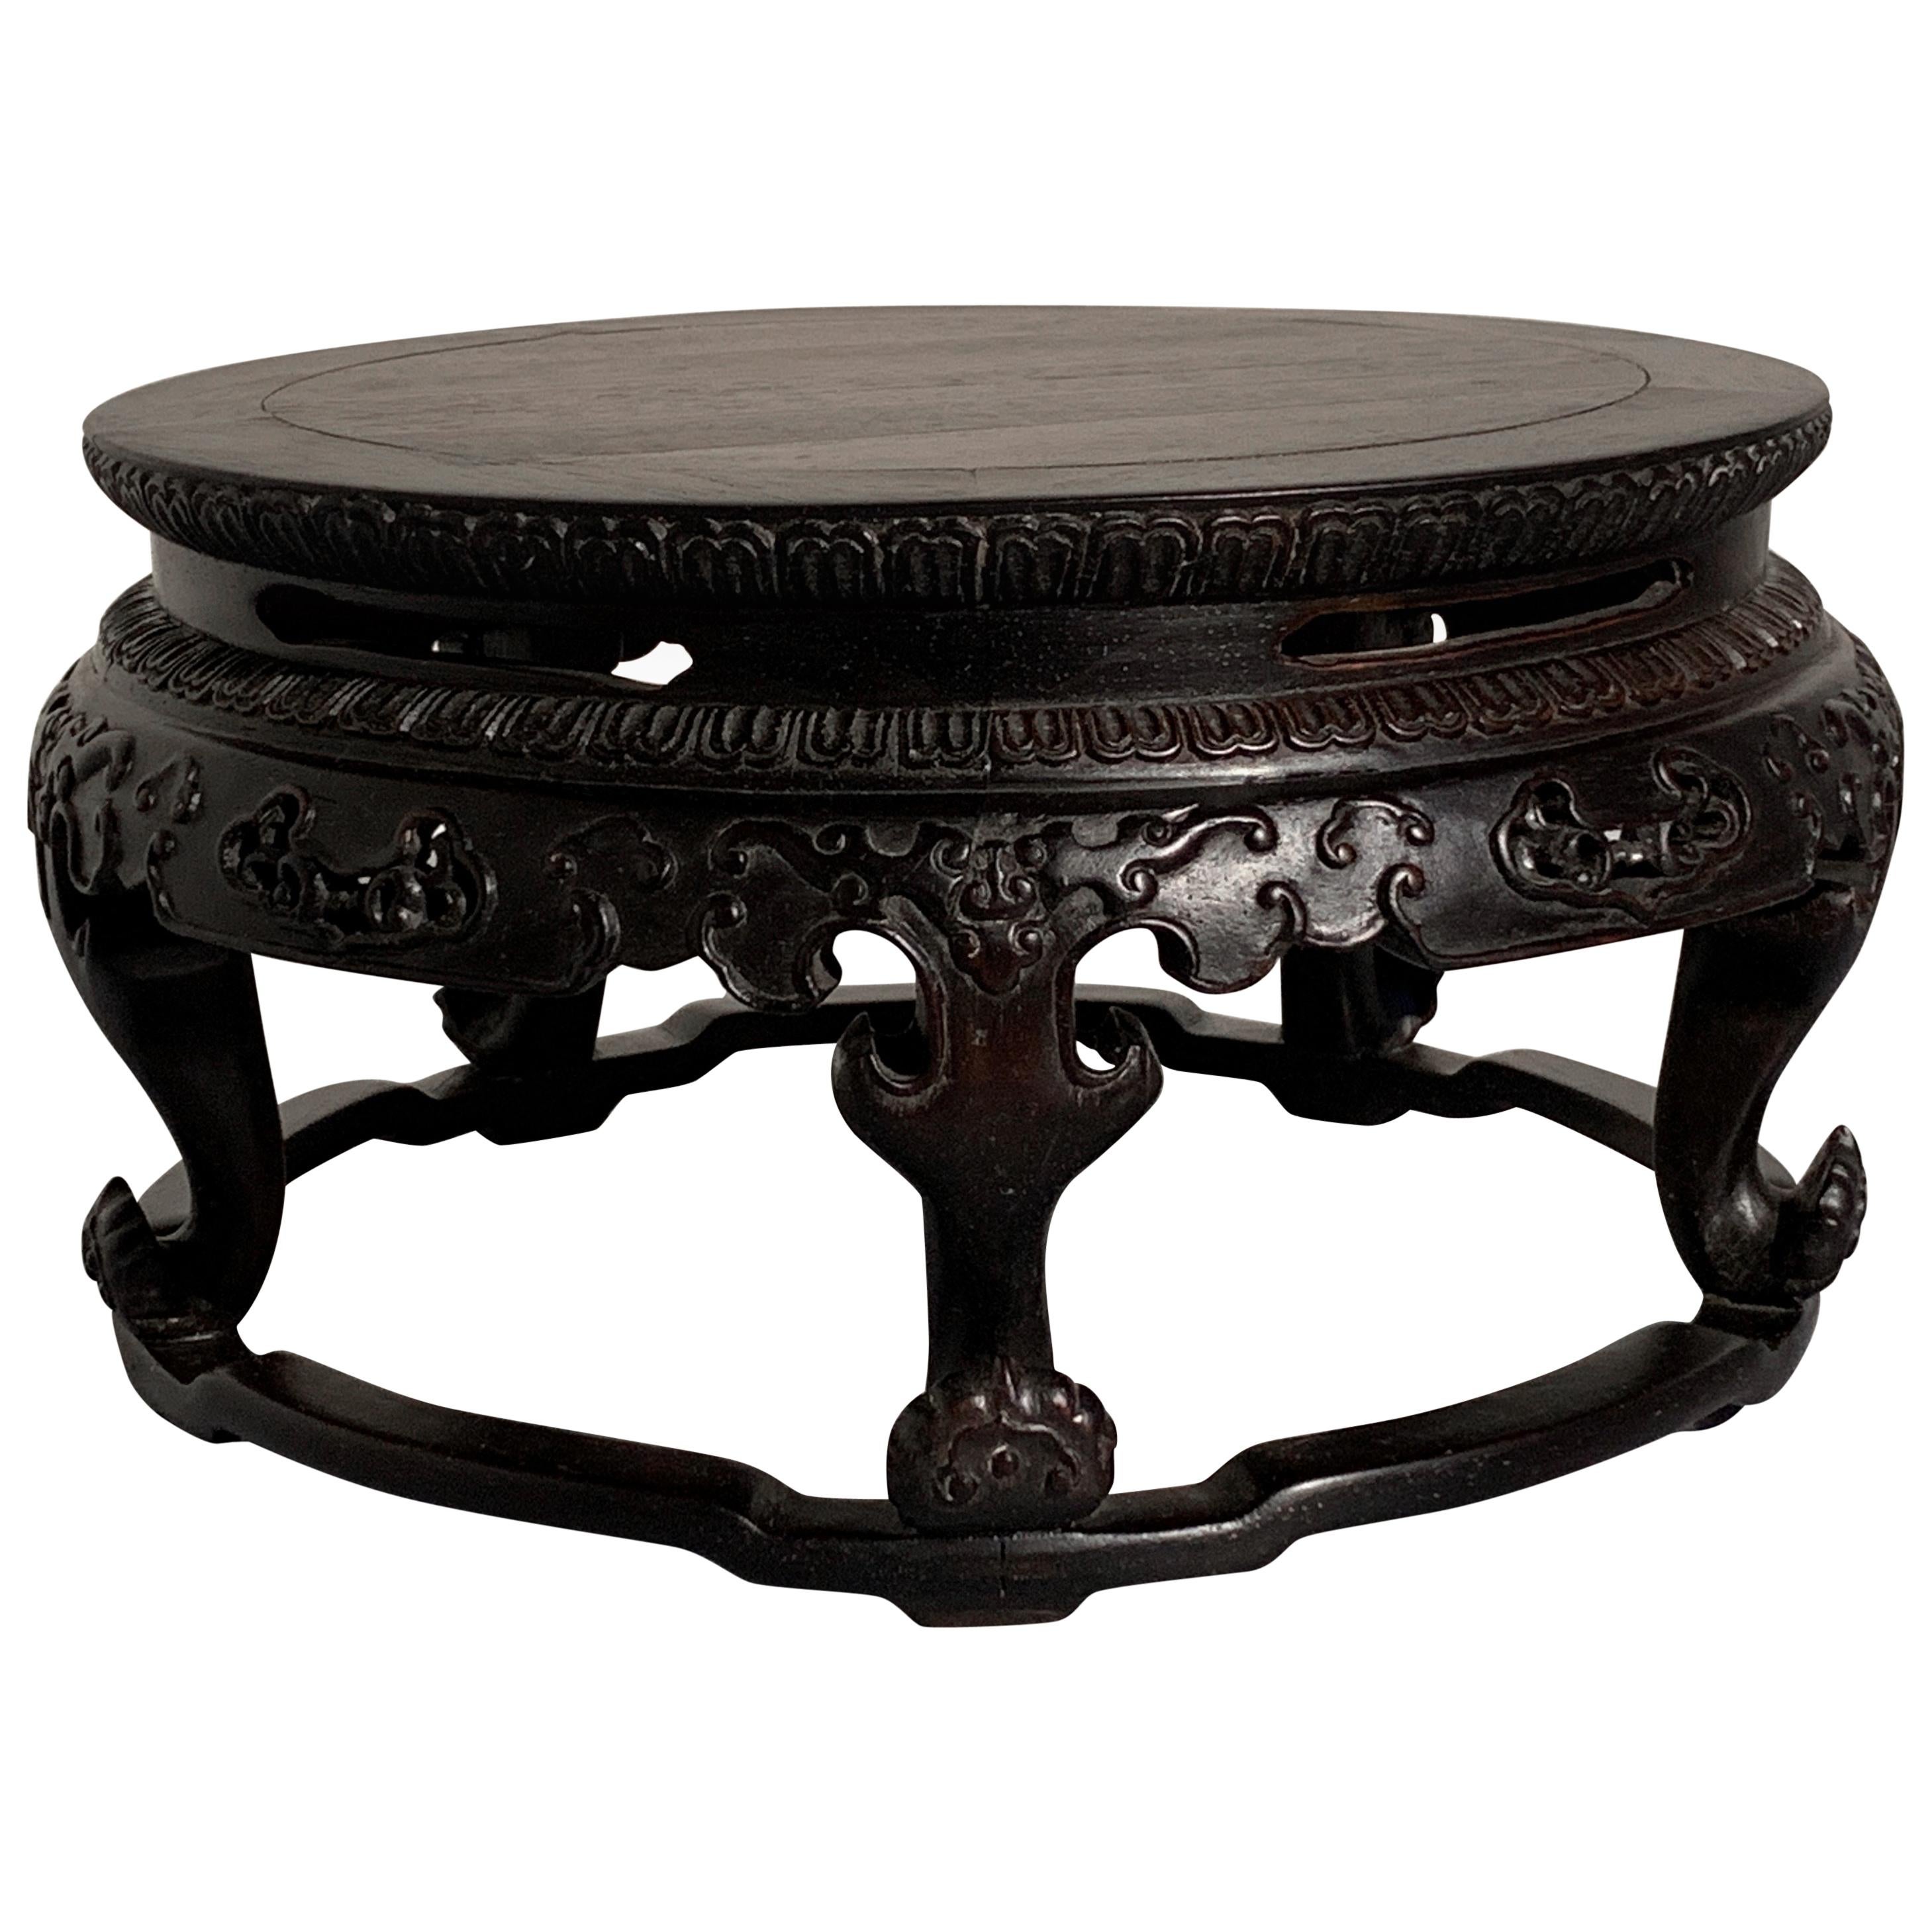 Chinese Carved Zitan Table-Form Stand, Republic Period, Mid-20th Century For Sale